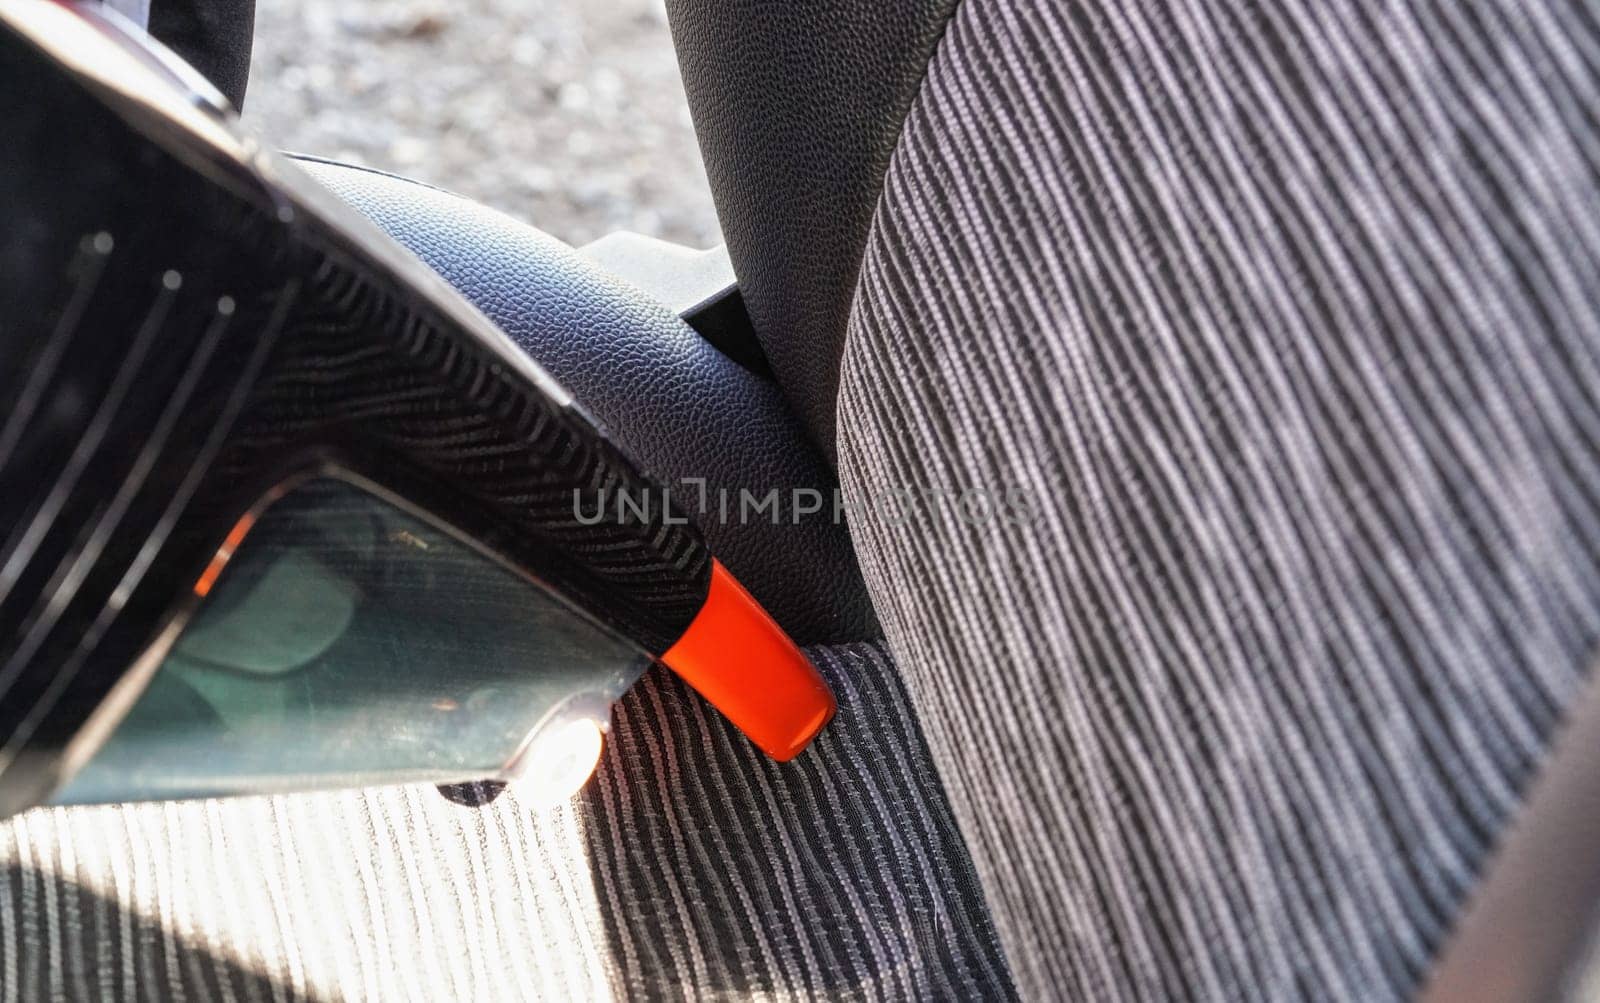 Car interior - seats, cleaned from dust with small orange portable vacuum cleaner by Ivanko